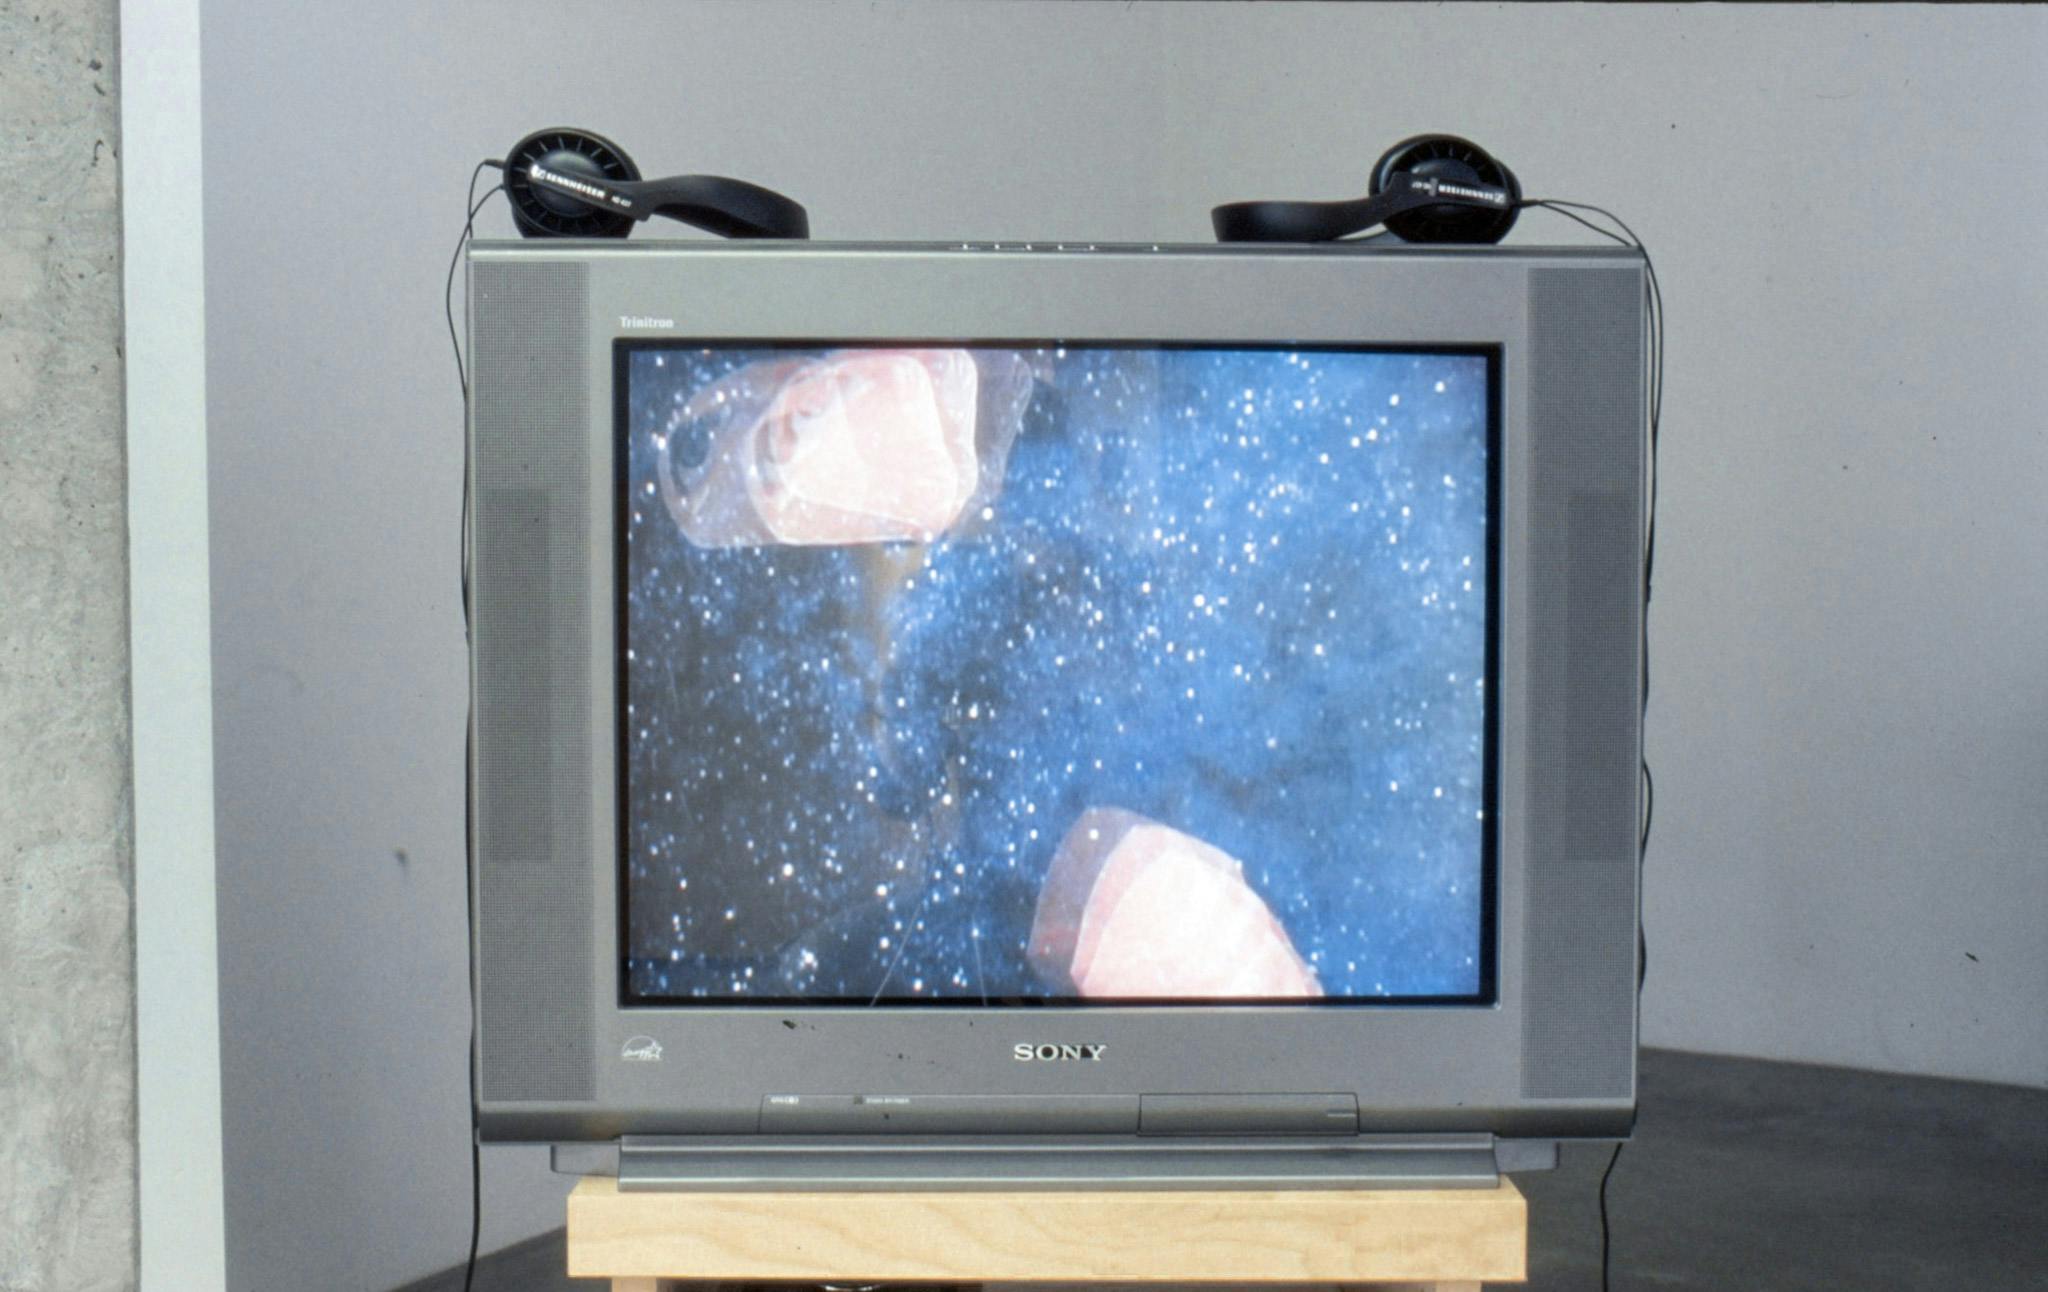 Detail of a video installation by Marina Roy. A CRT TV shows a coloured image of two pink circular shapes in motion in a dark blue background filled with stars.